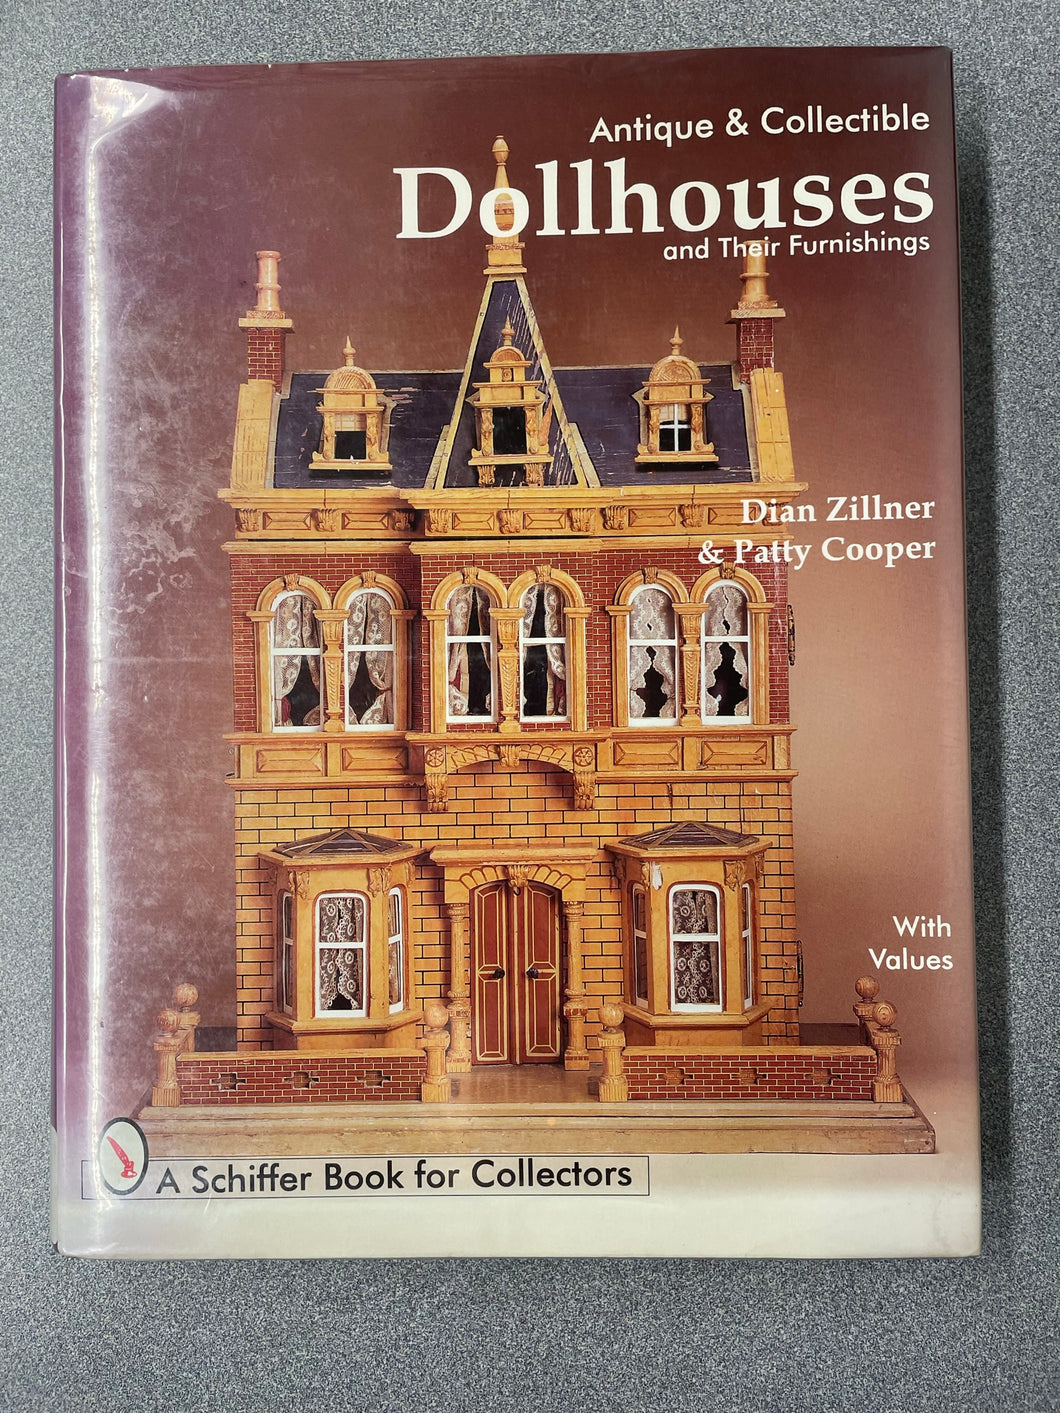 Antique and Collectible Dollhouses and Their Furnishings, Zillner, Dian and Patty Cooper [1998] CG 8/23